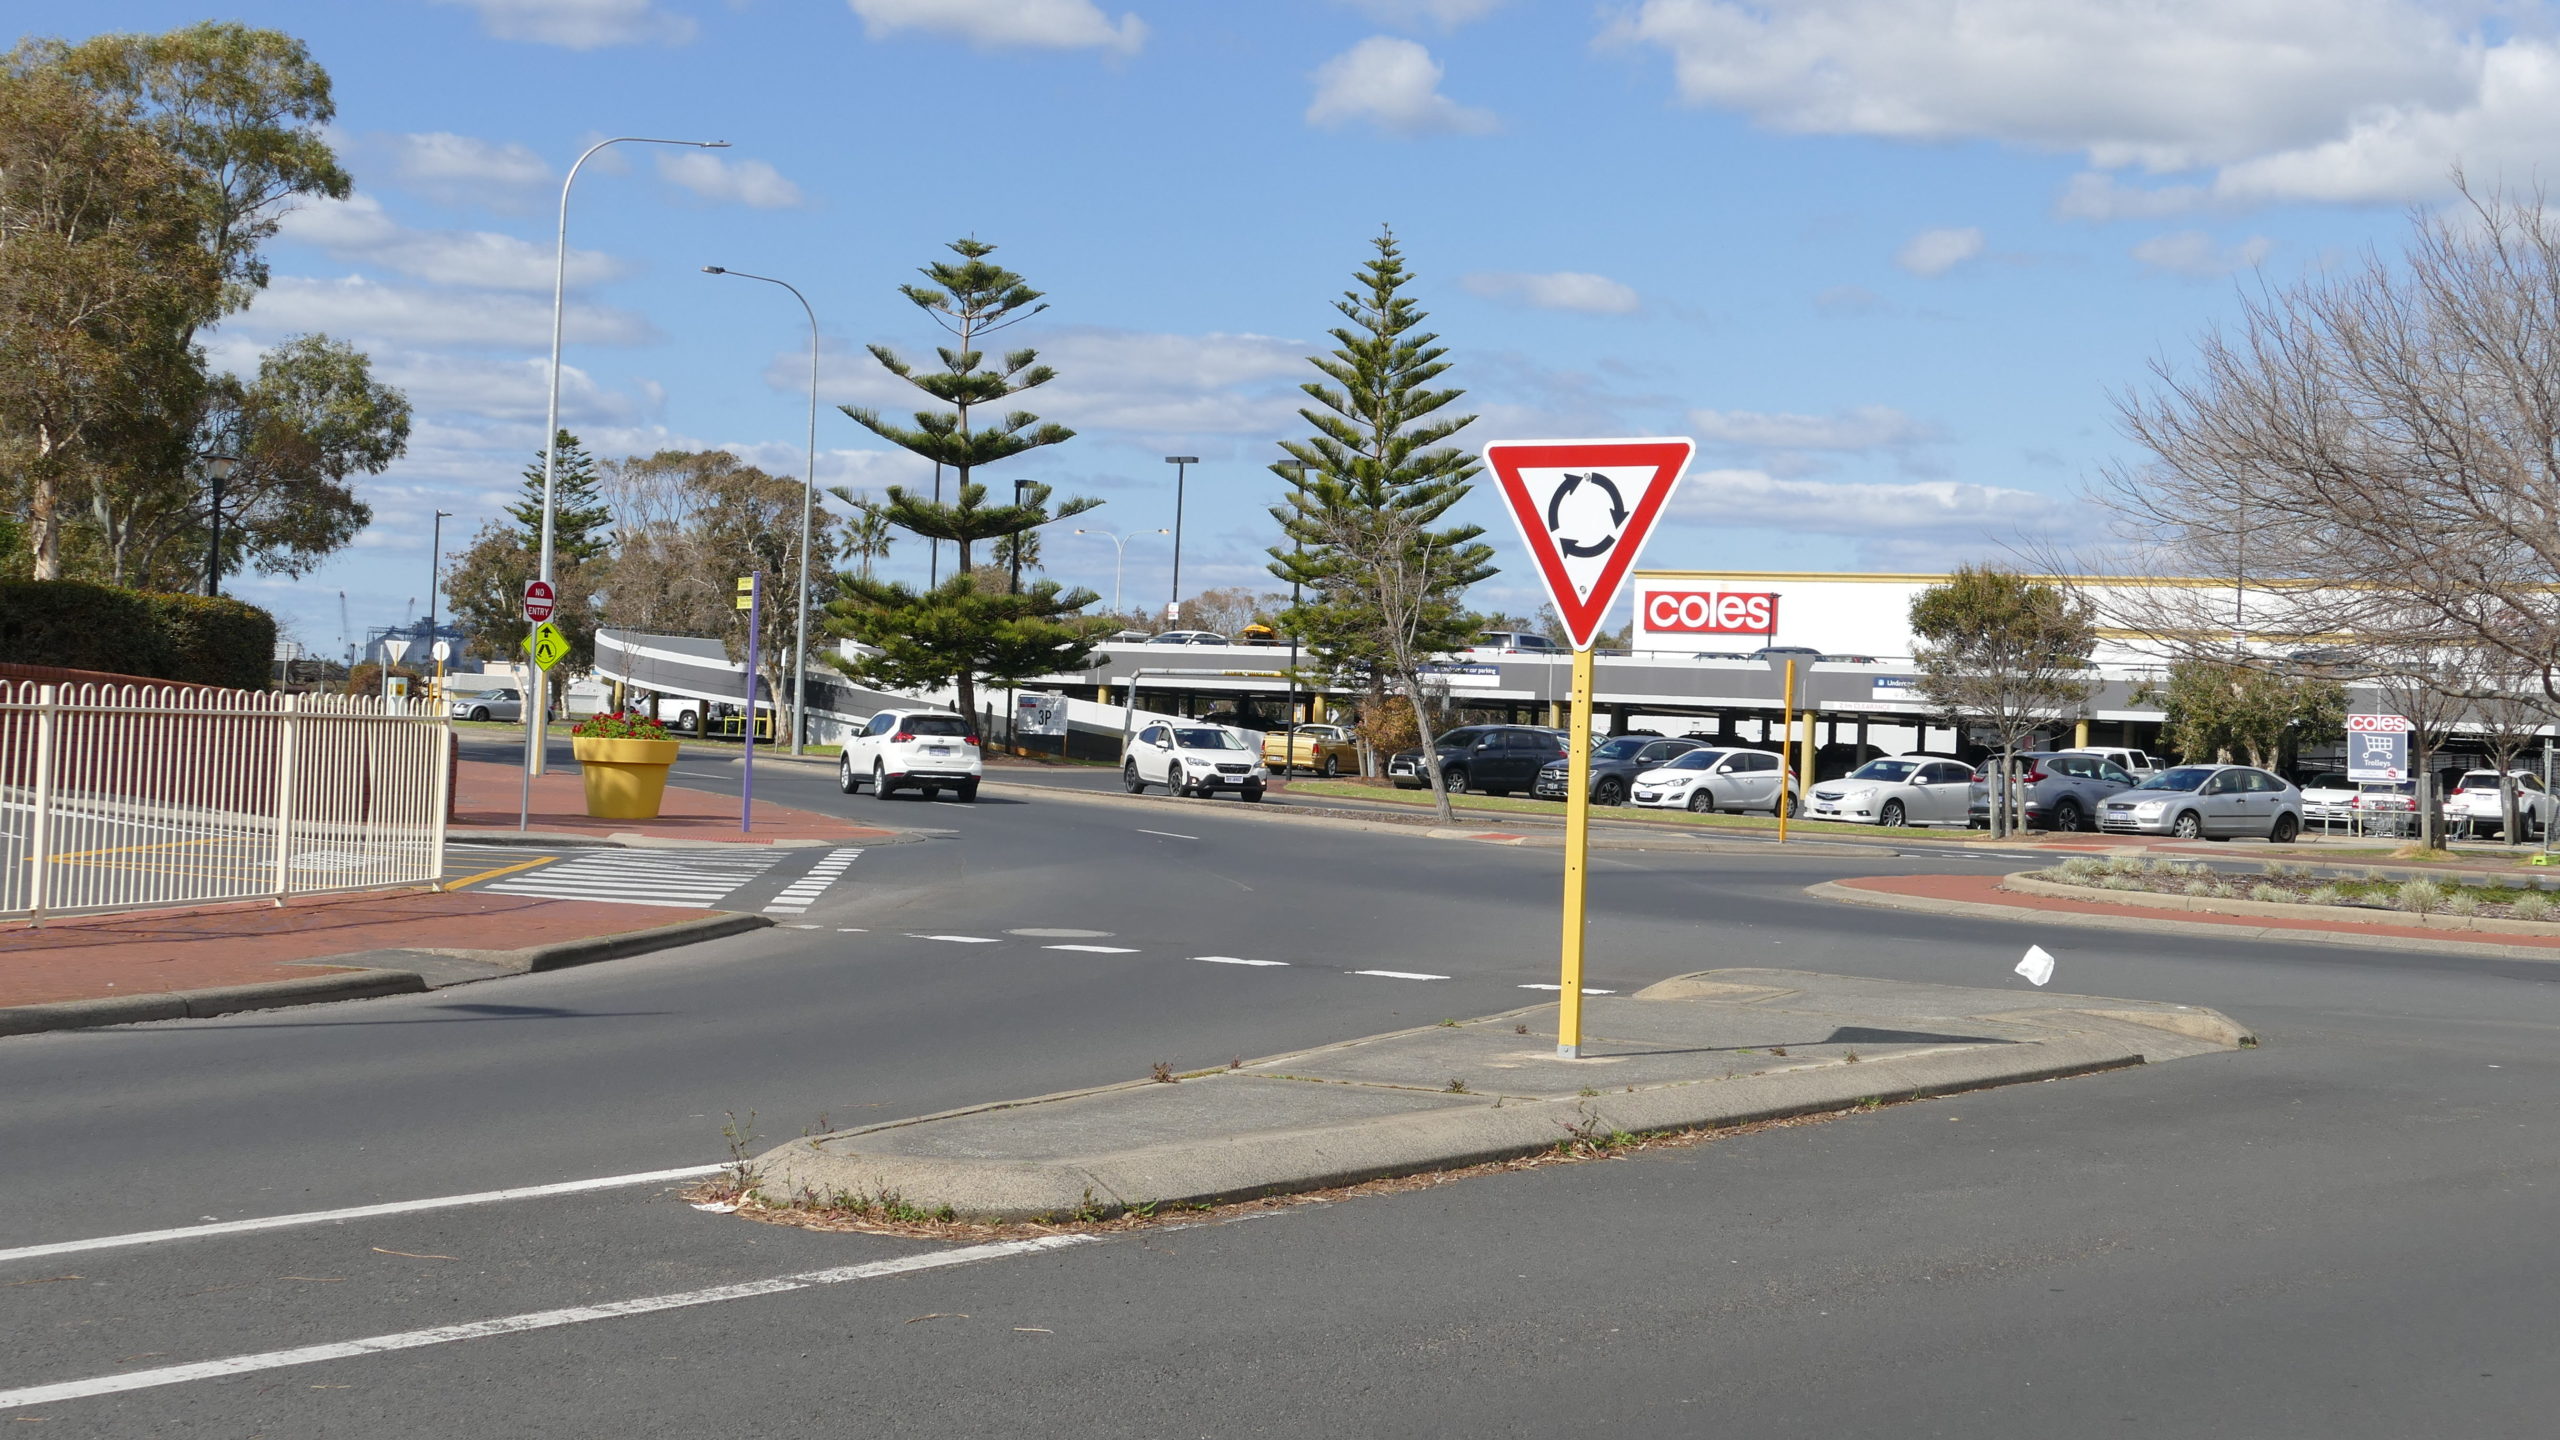 Entrance into Bunbury CBD. A road with median strip and give way sign and half a roundabout behind it. Two white cars driving along the road - one approaching the roundabout the other driving away from it. Shopping centre car park with cars in the background.